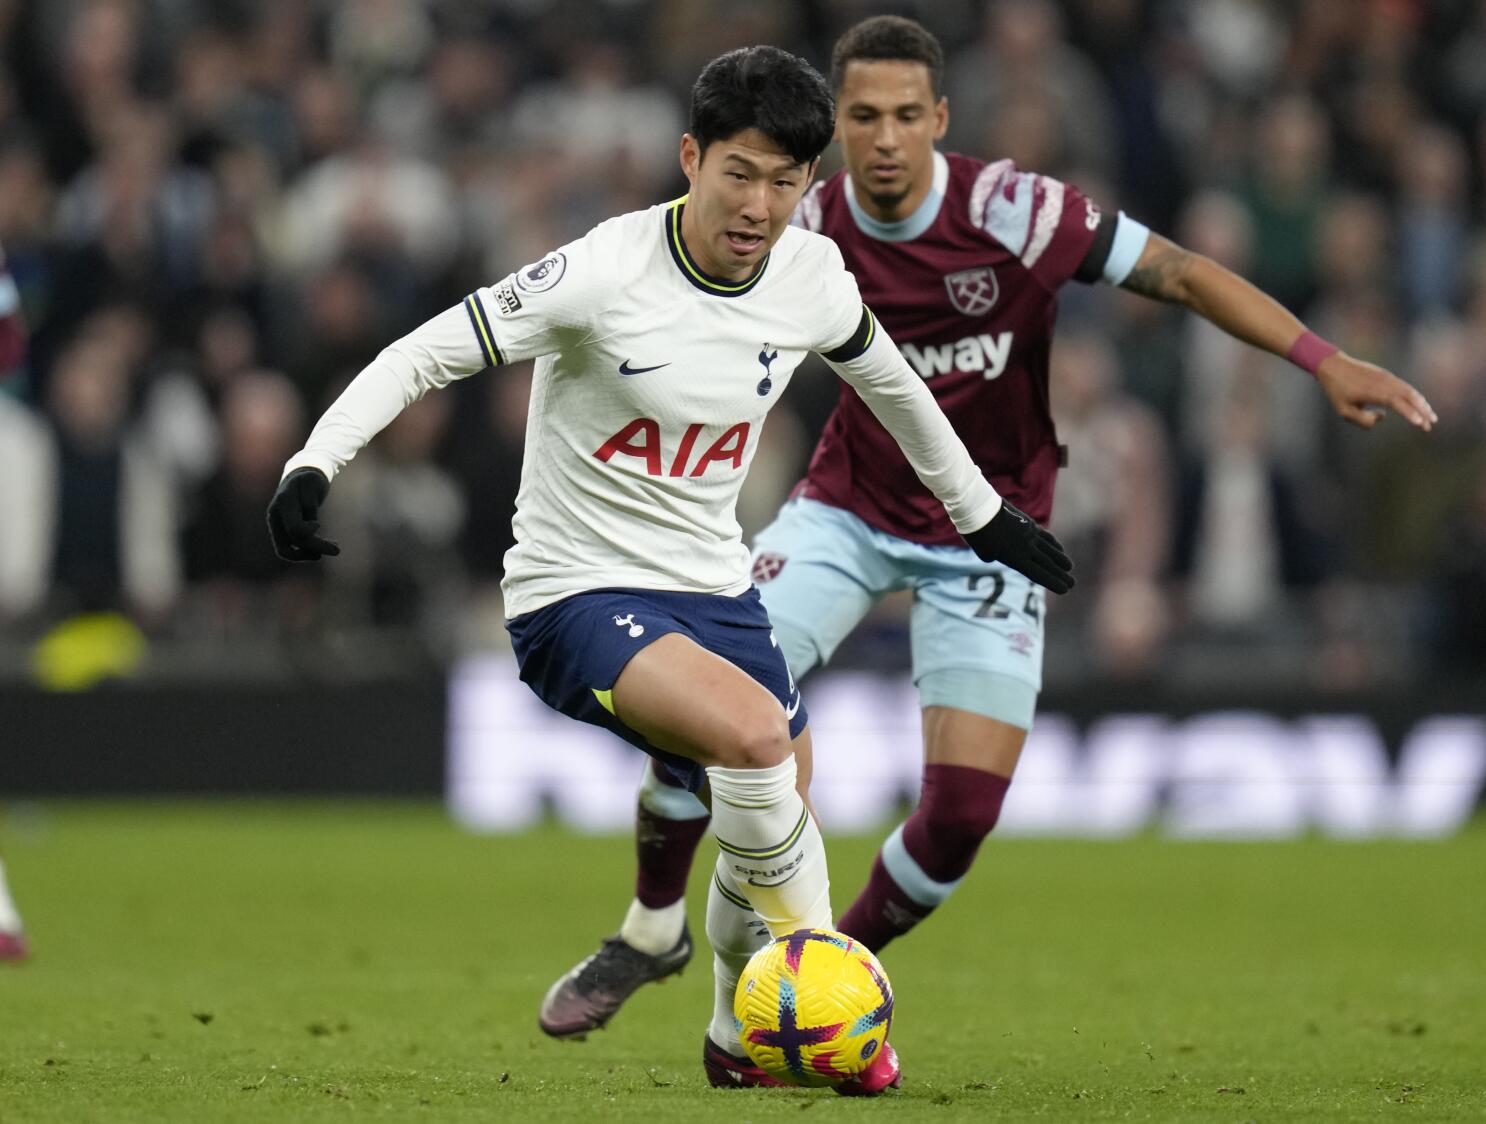 We Love Son Heung-Min: A guide to the soccer superstar